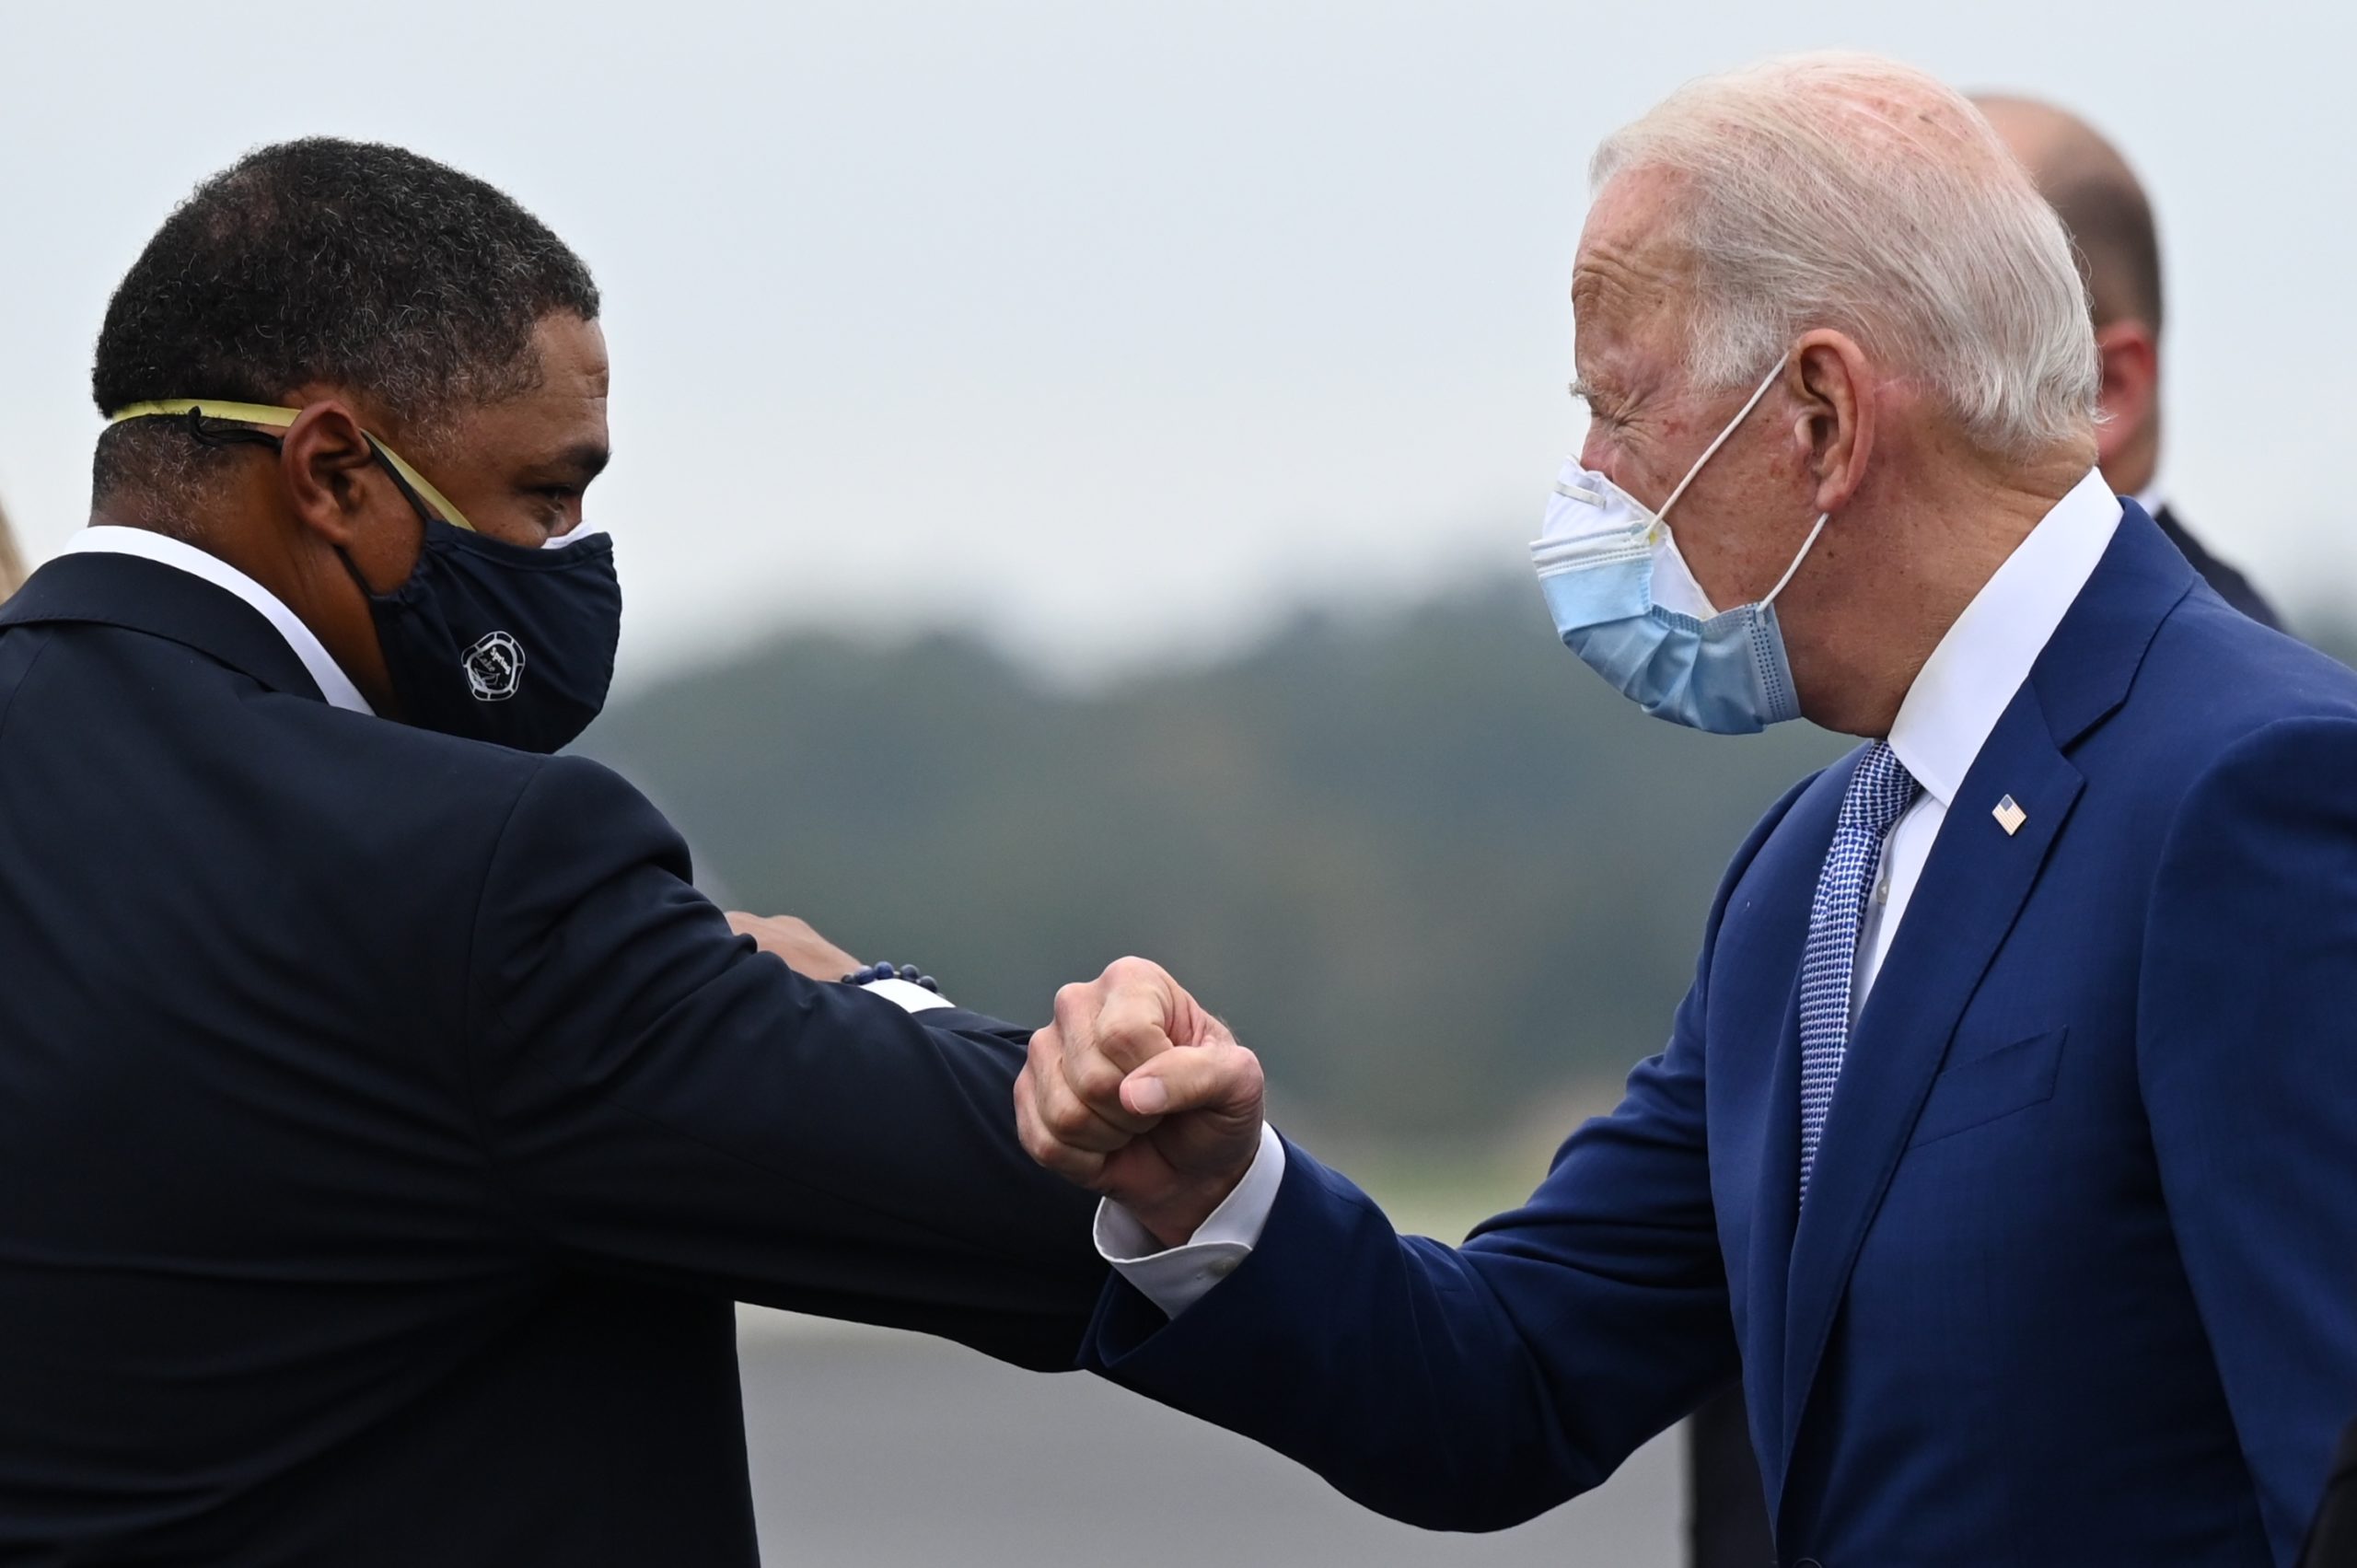 Democratic presidential candidate Joe Biden is greeted by US Congressman Cedric Richmond, D-LA as he arrives in Columbus, Georgia, on October 27, 2020. (Photo by JIM WATSON/AFP via Getty Images)